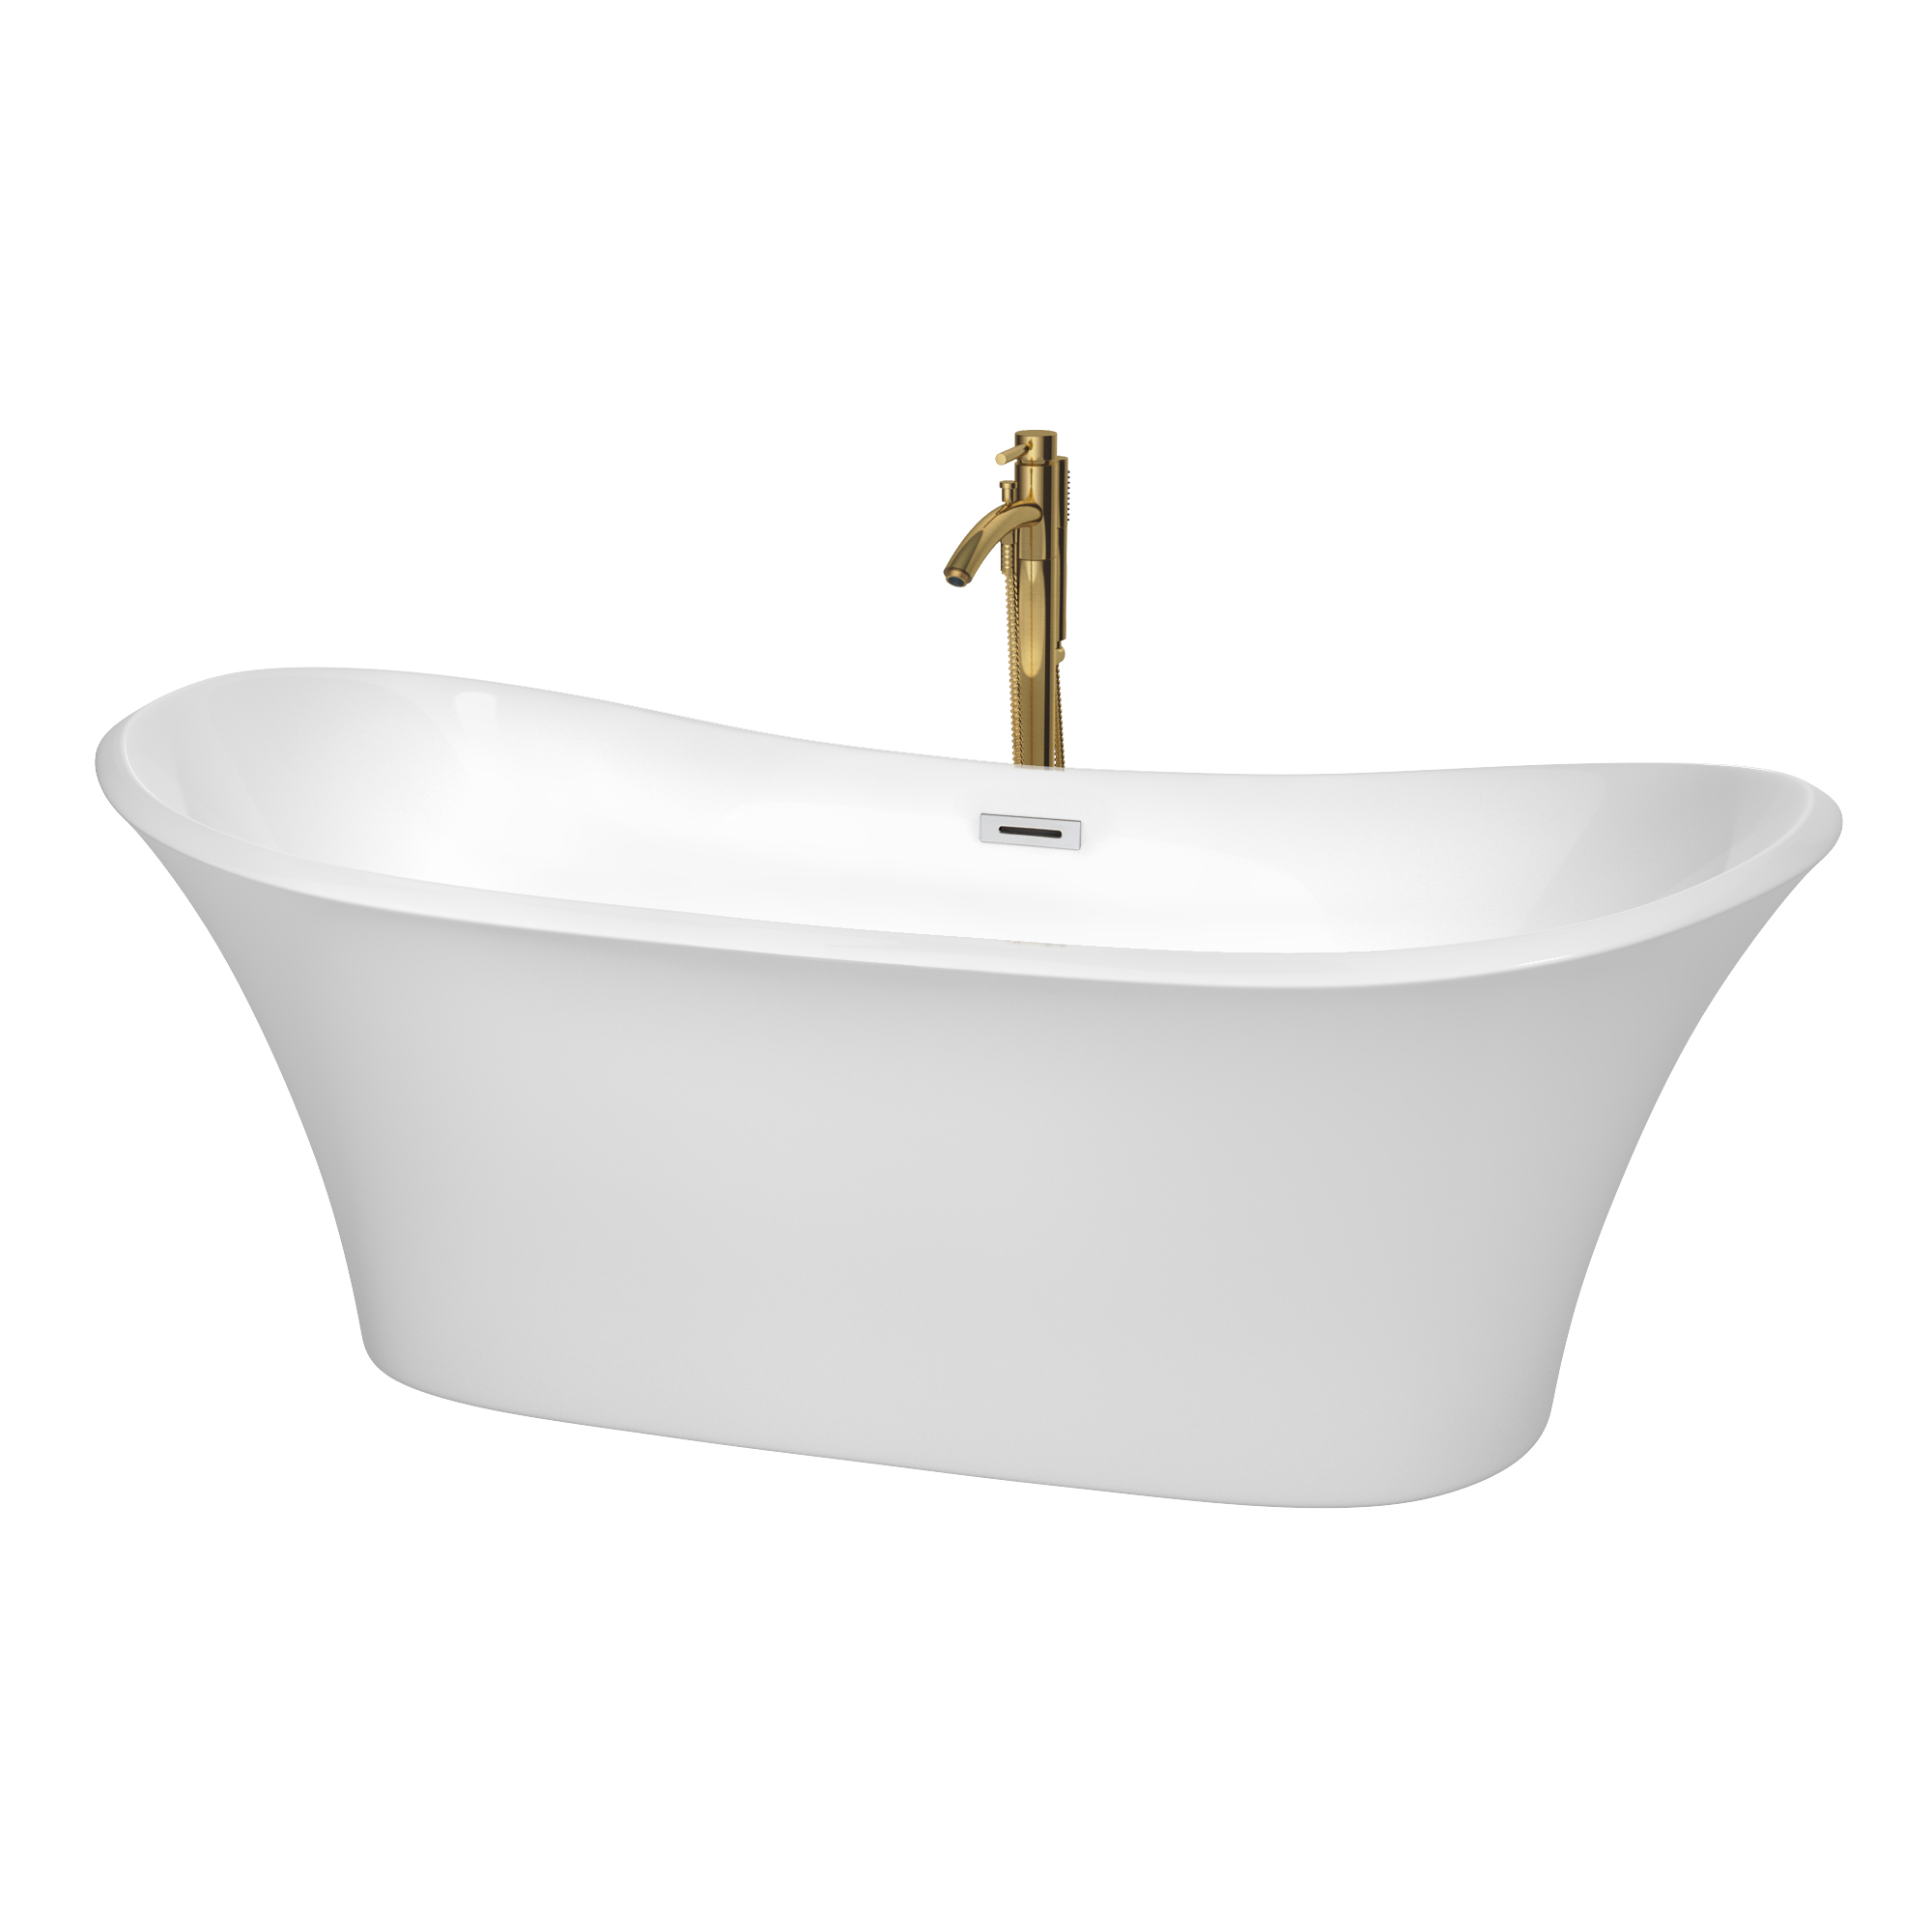 71" Freestanding Bathtub in White with Polished Chrome Trim and Floor Mounted Faucet in Brushed Gold